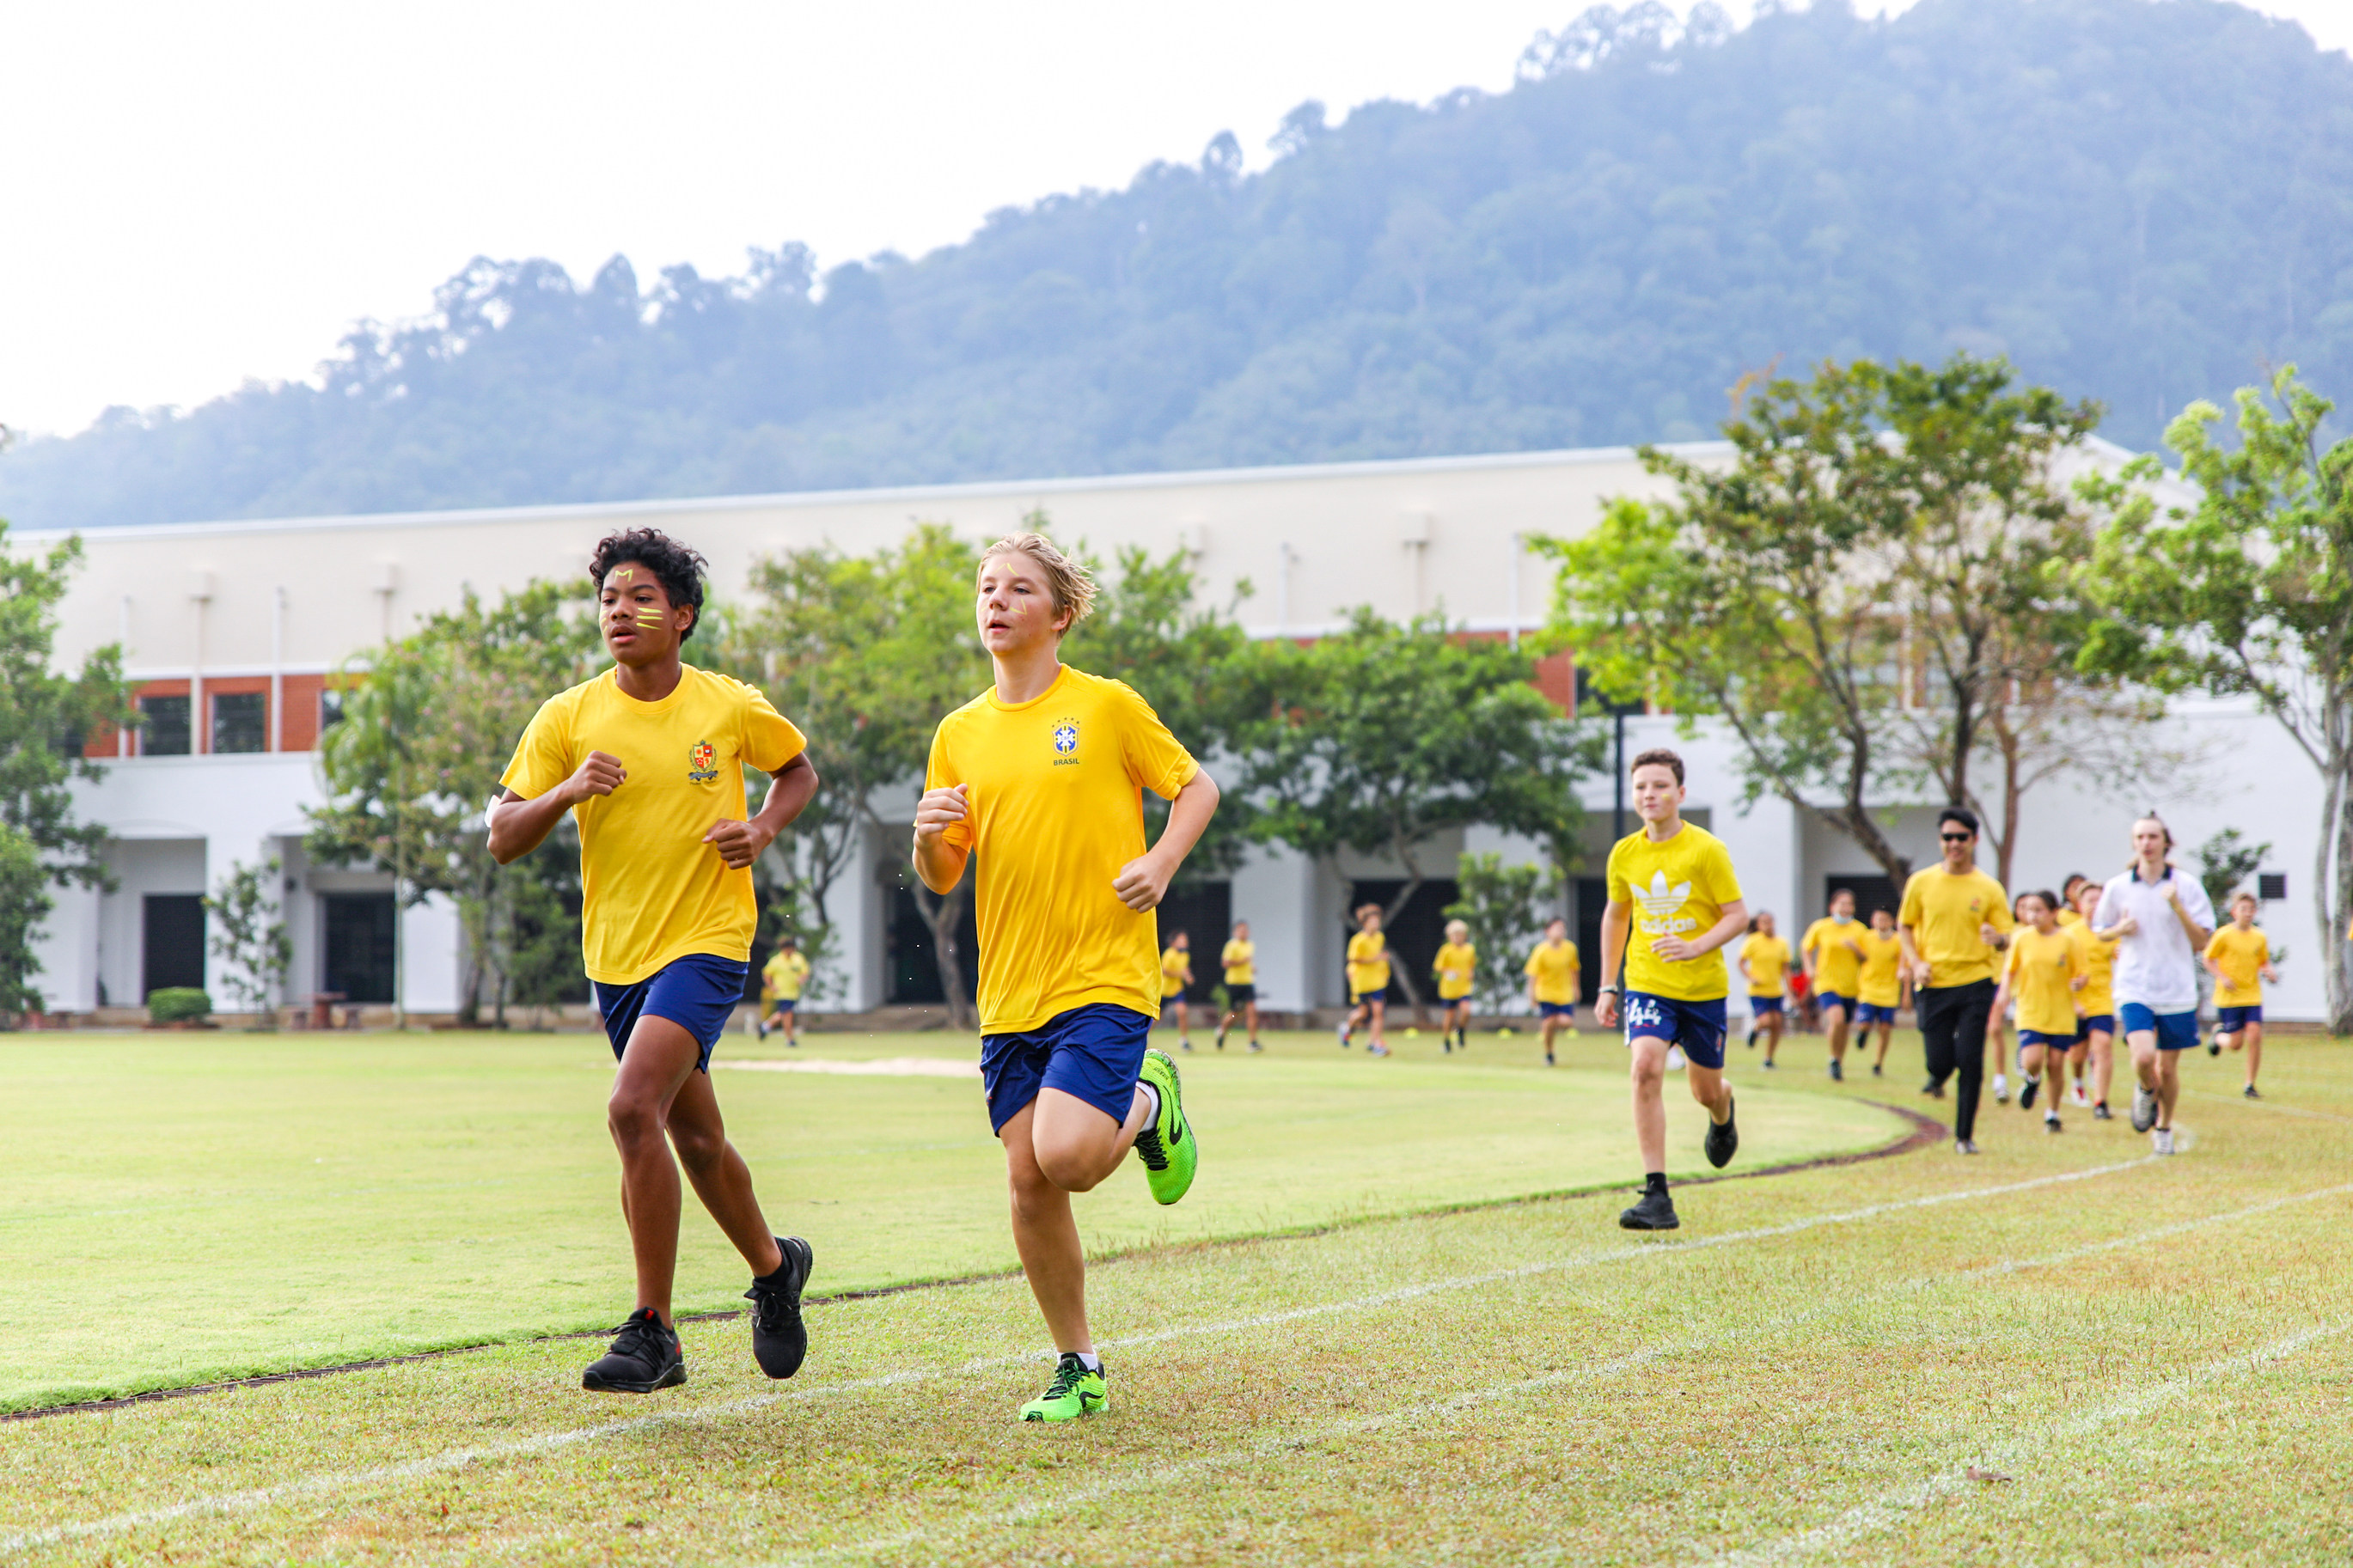 Many families are surprised to learn the Thai island of Phuket is home to the English-medium, co-educational British International School, Phuket, which includes numerous high-performance sports facilities. 